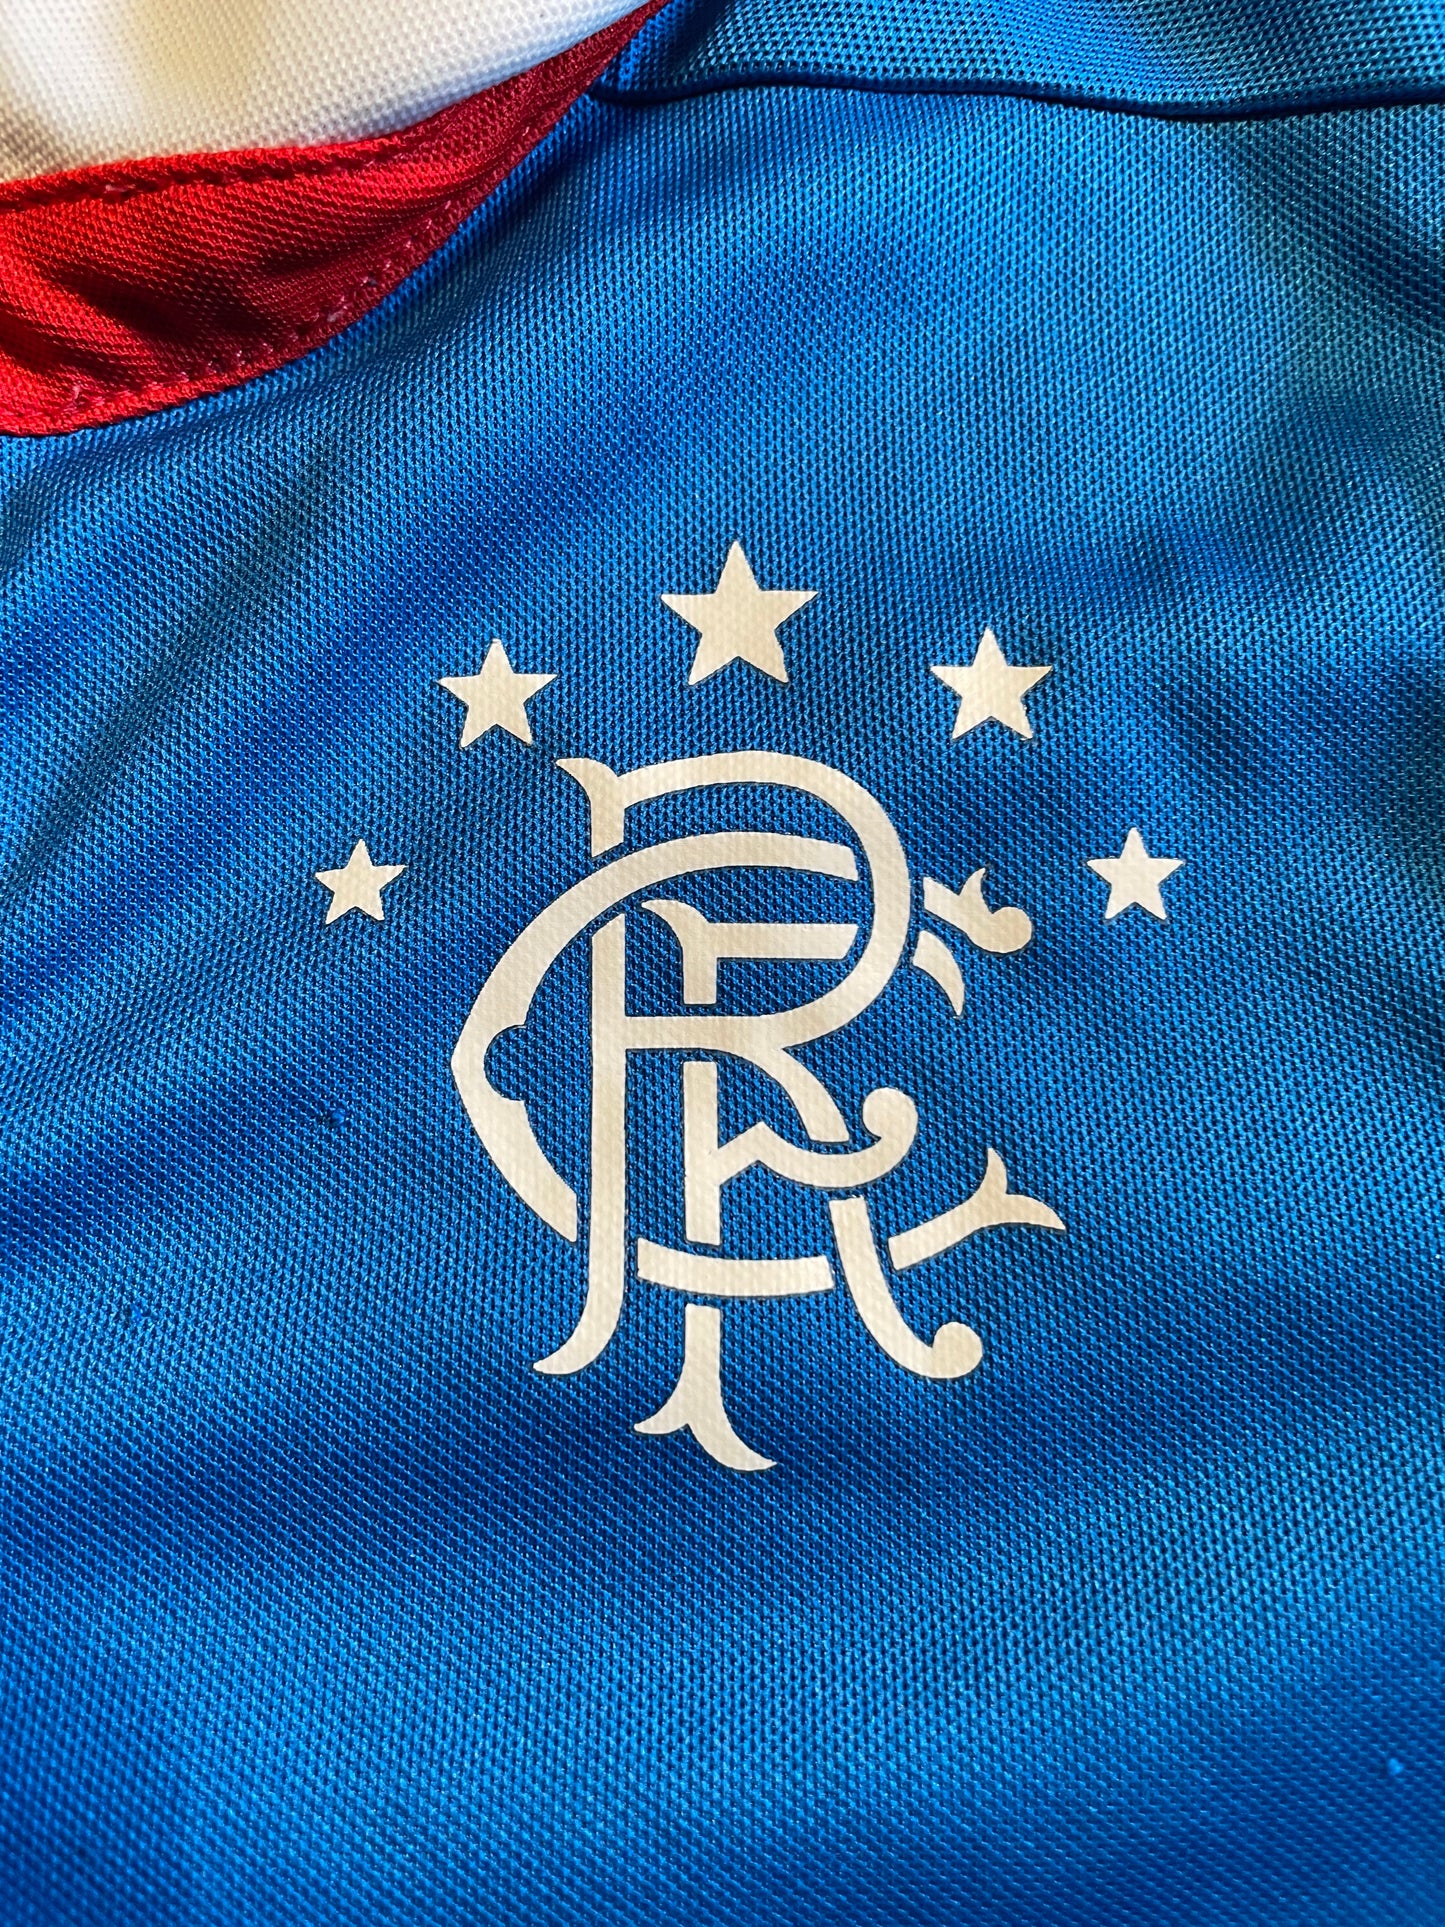 Rangers 2014 Home Shirt (average) Aged 5 to 6 years. Height 16 inches